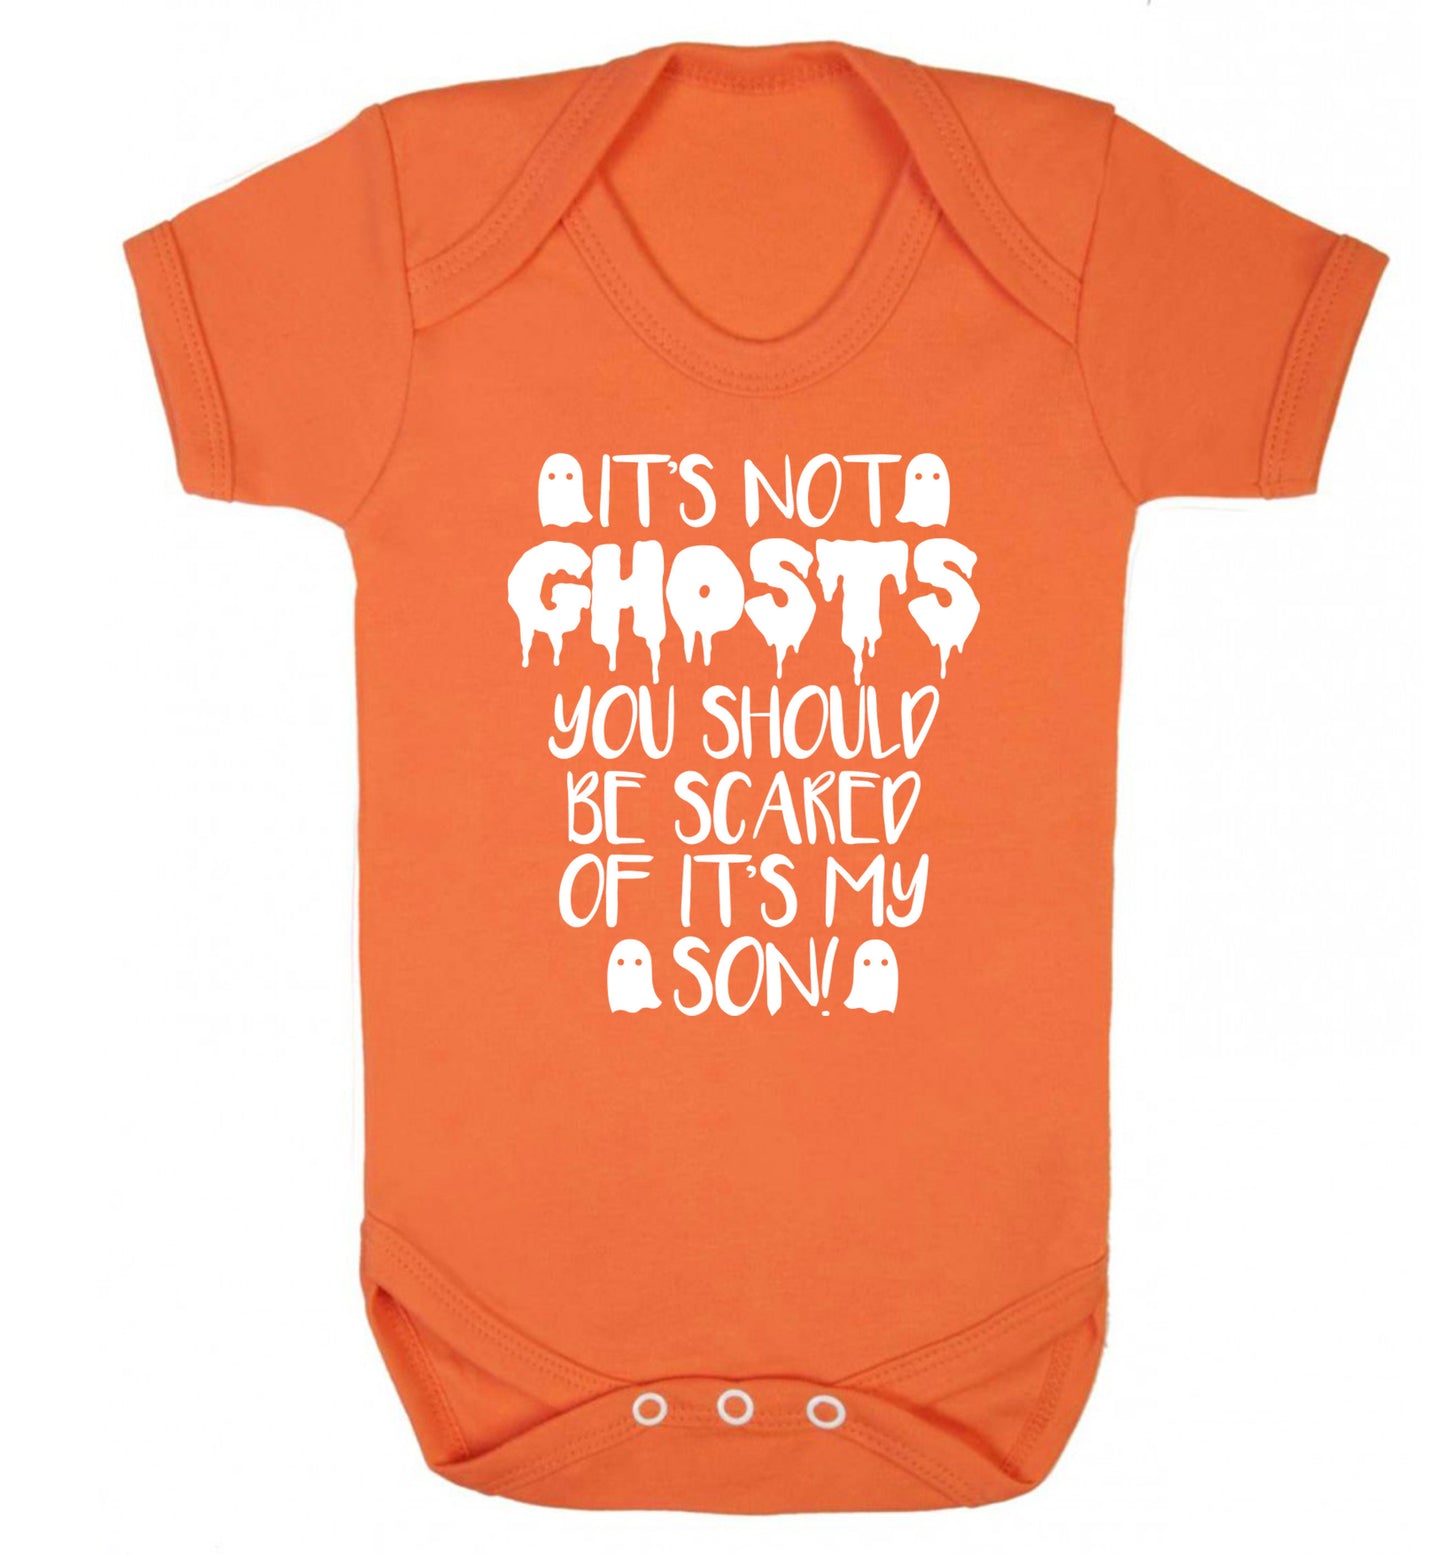 It's not ghosts you should be scared of it's my son! Baby Vest orange 18-24 months